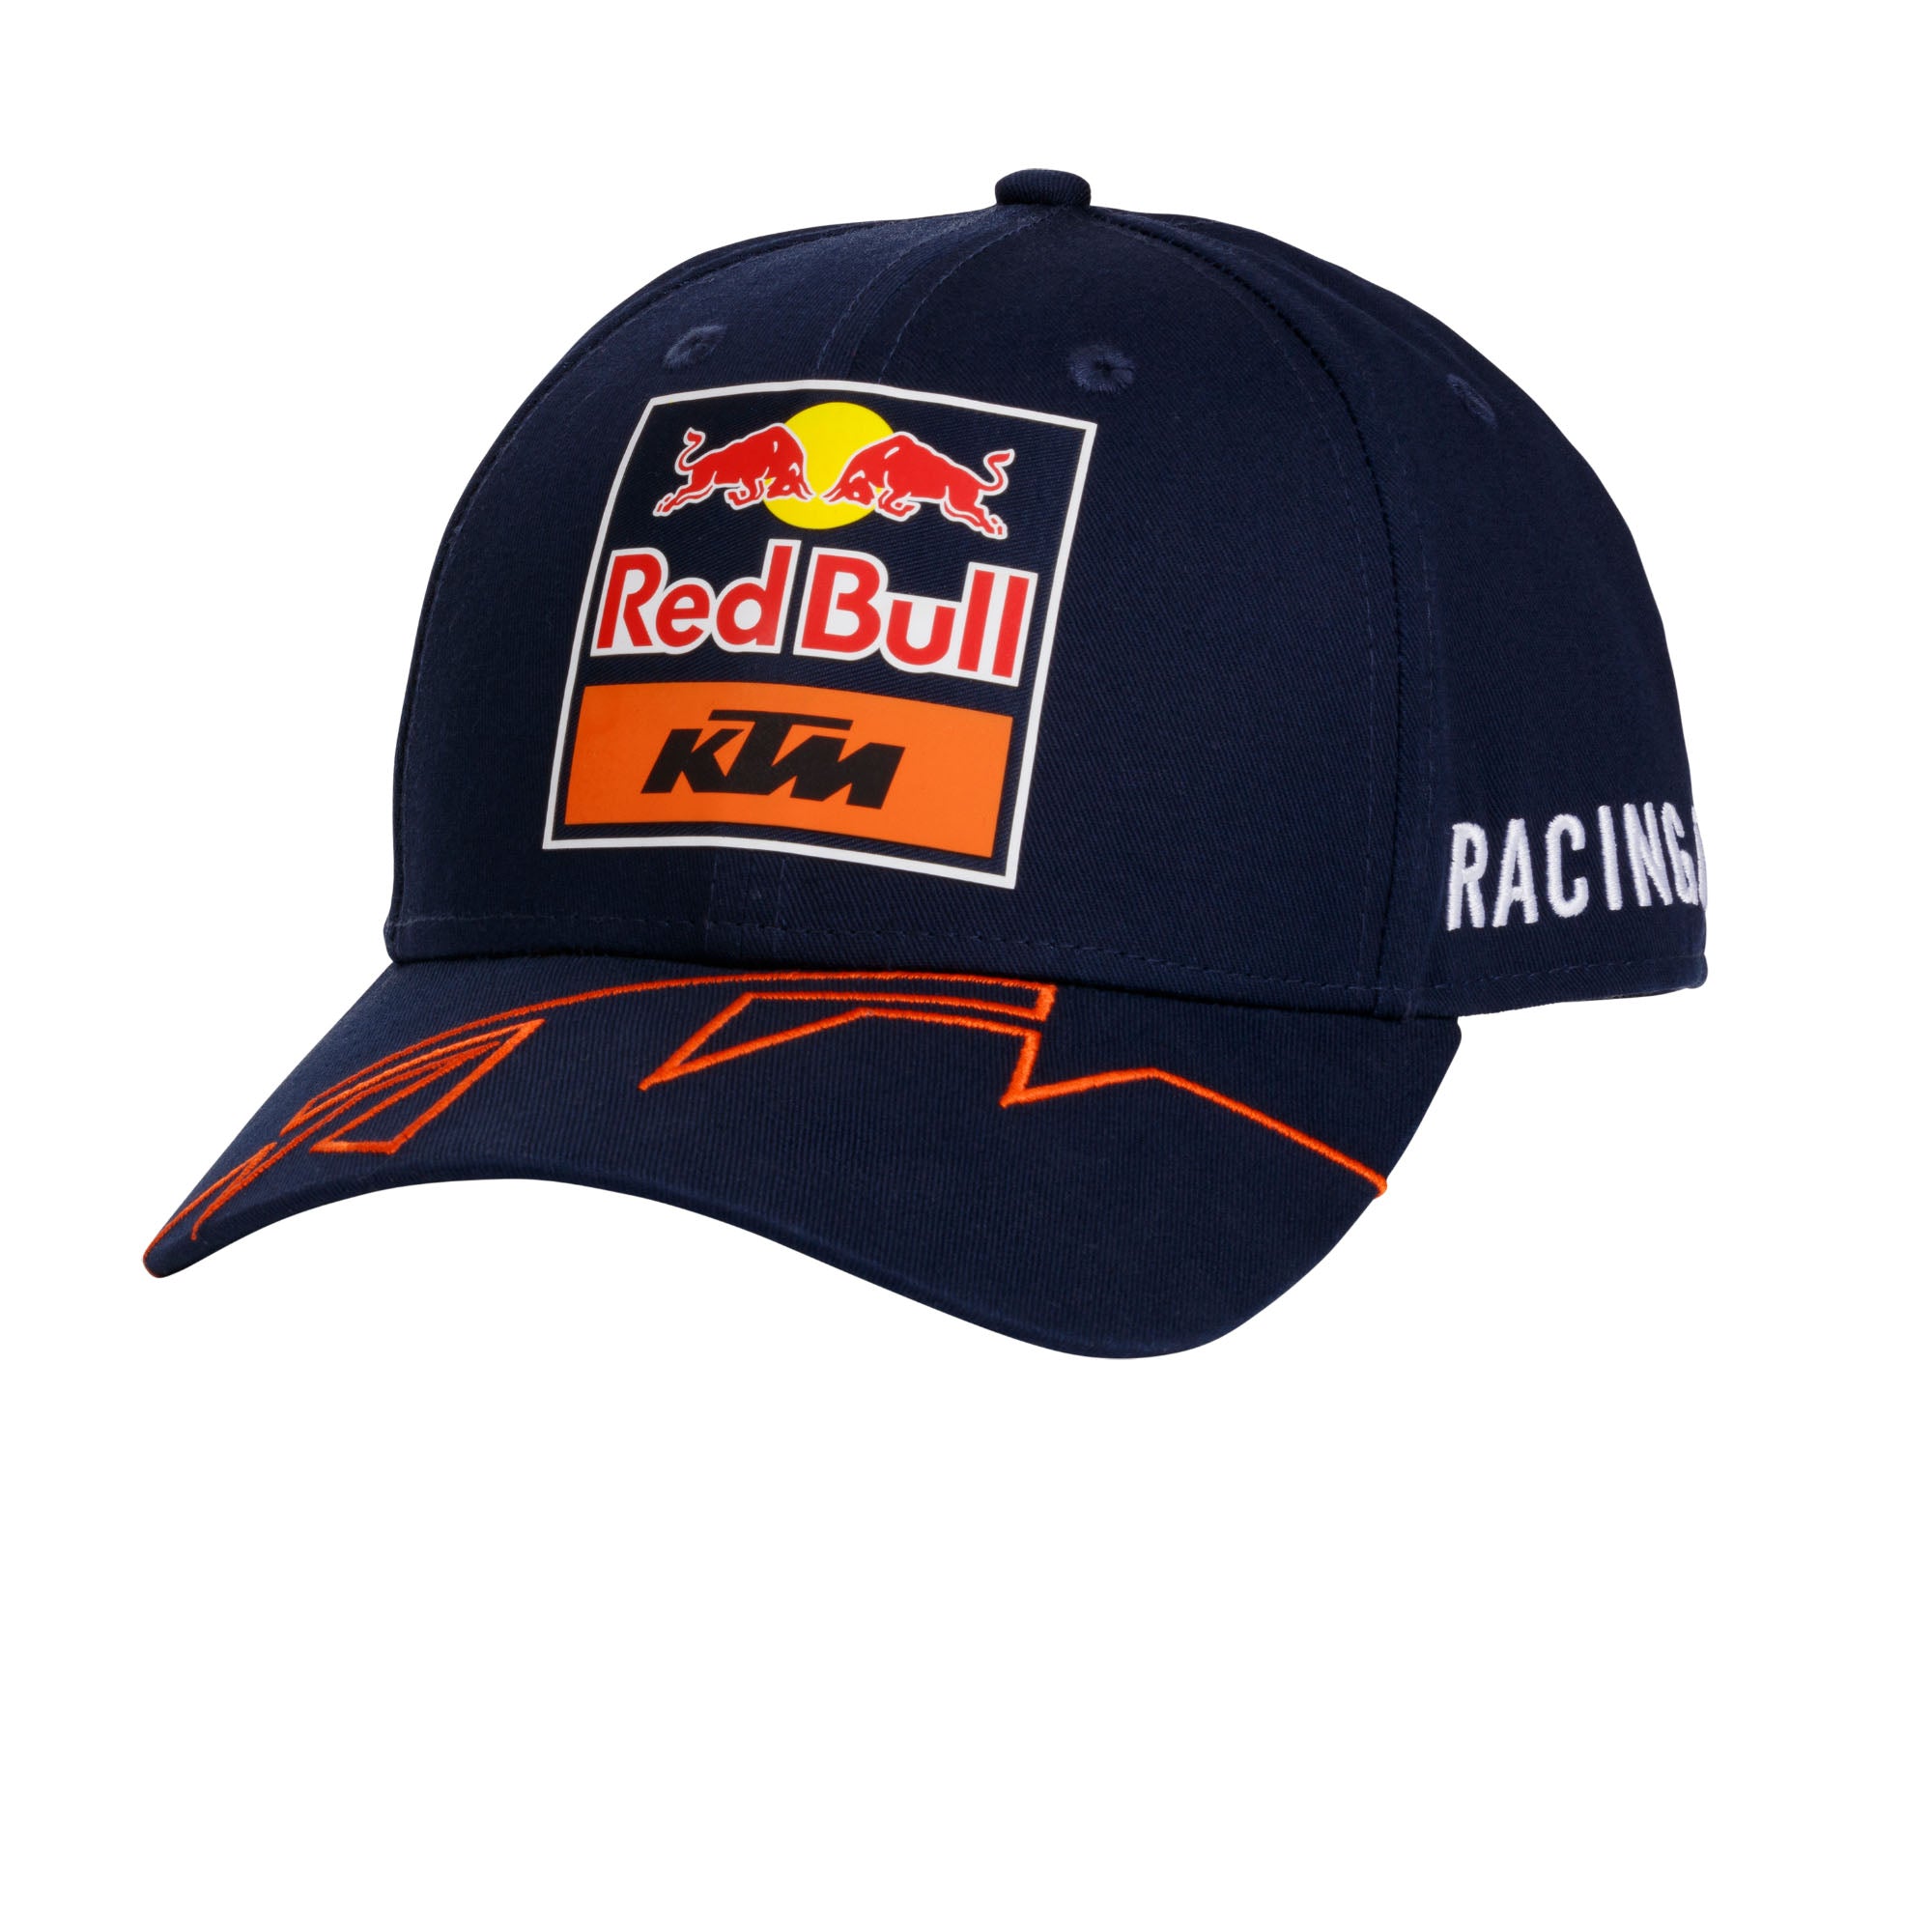 Red Bull Racing Hats, Caps & More -- Get them now!